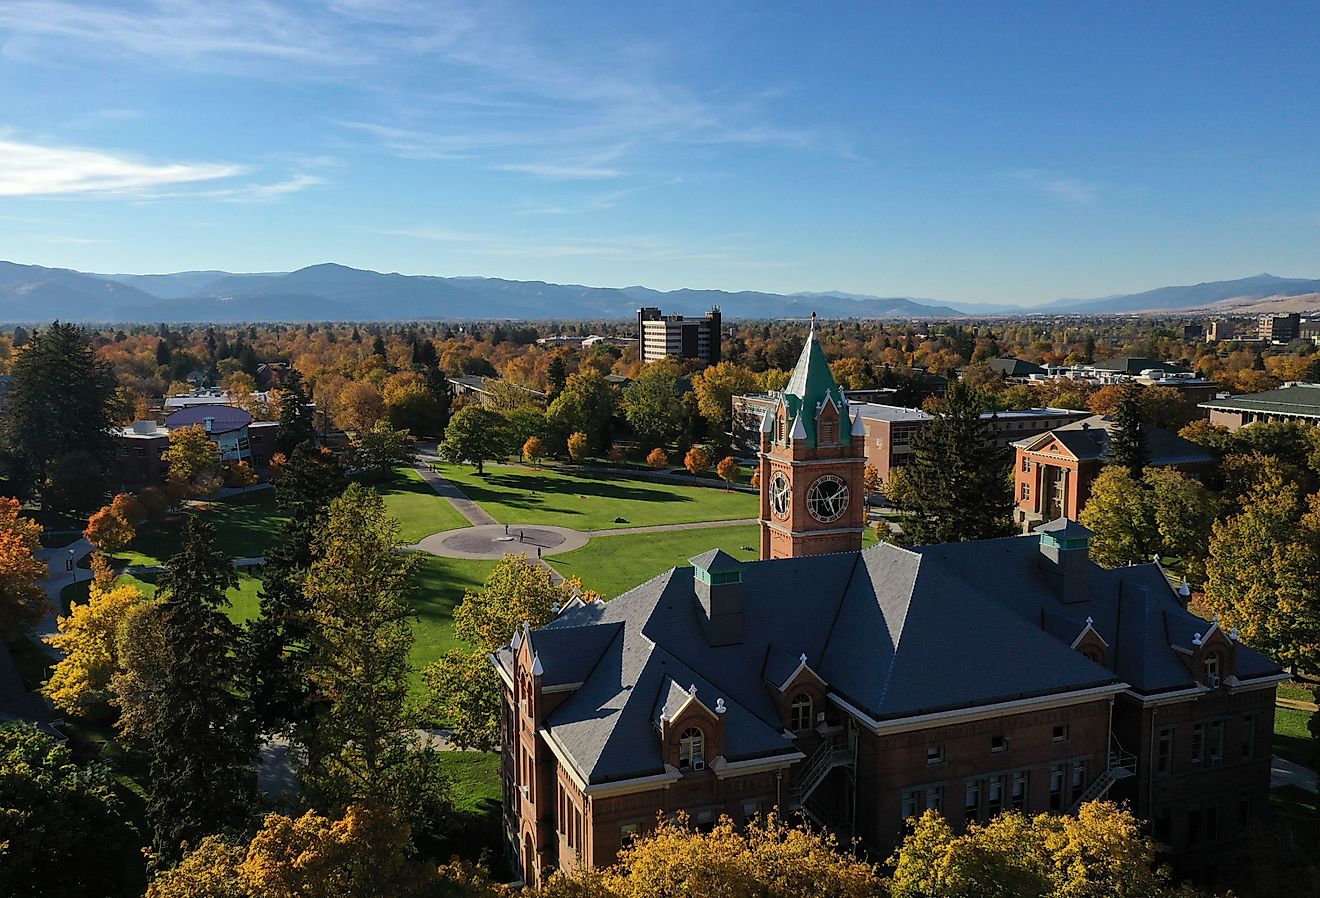 Looking northeast over the Main Hall clock tower and The Oval at the University of Montana during Autumn, with the Missoula Valley stretching out into the distance.